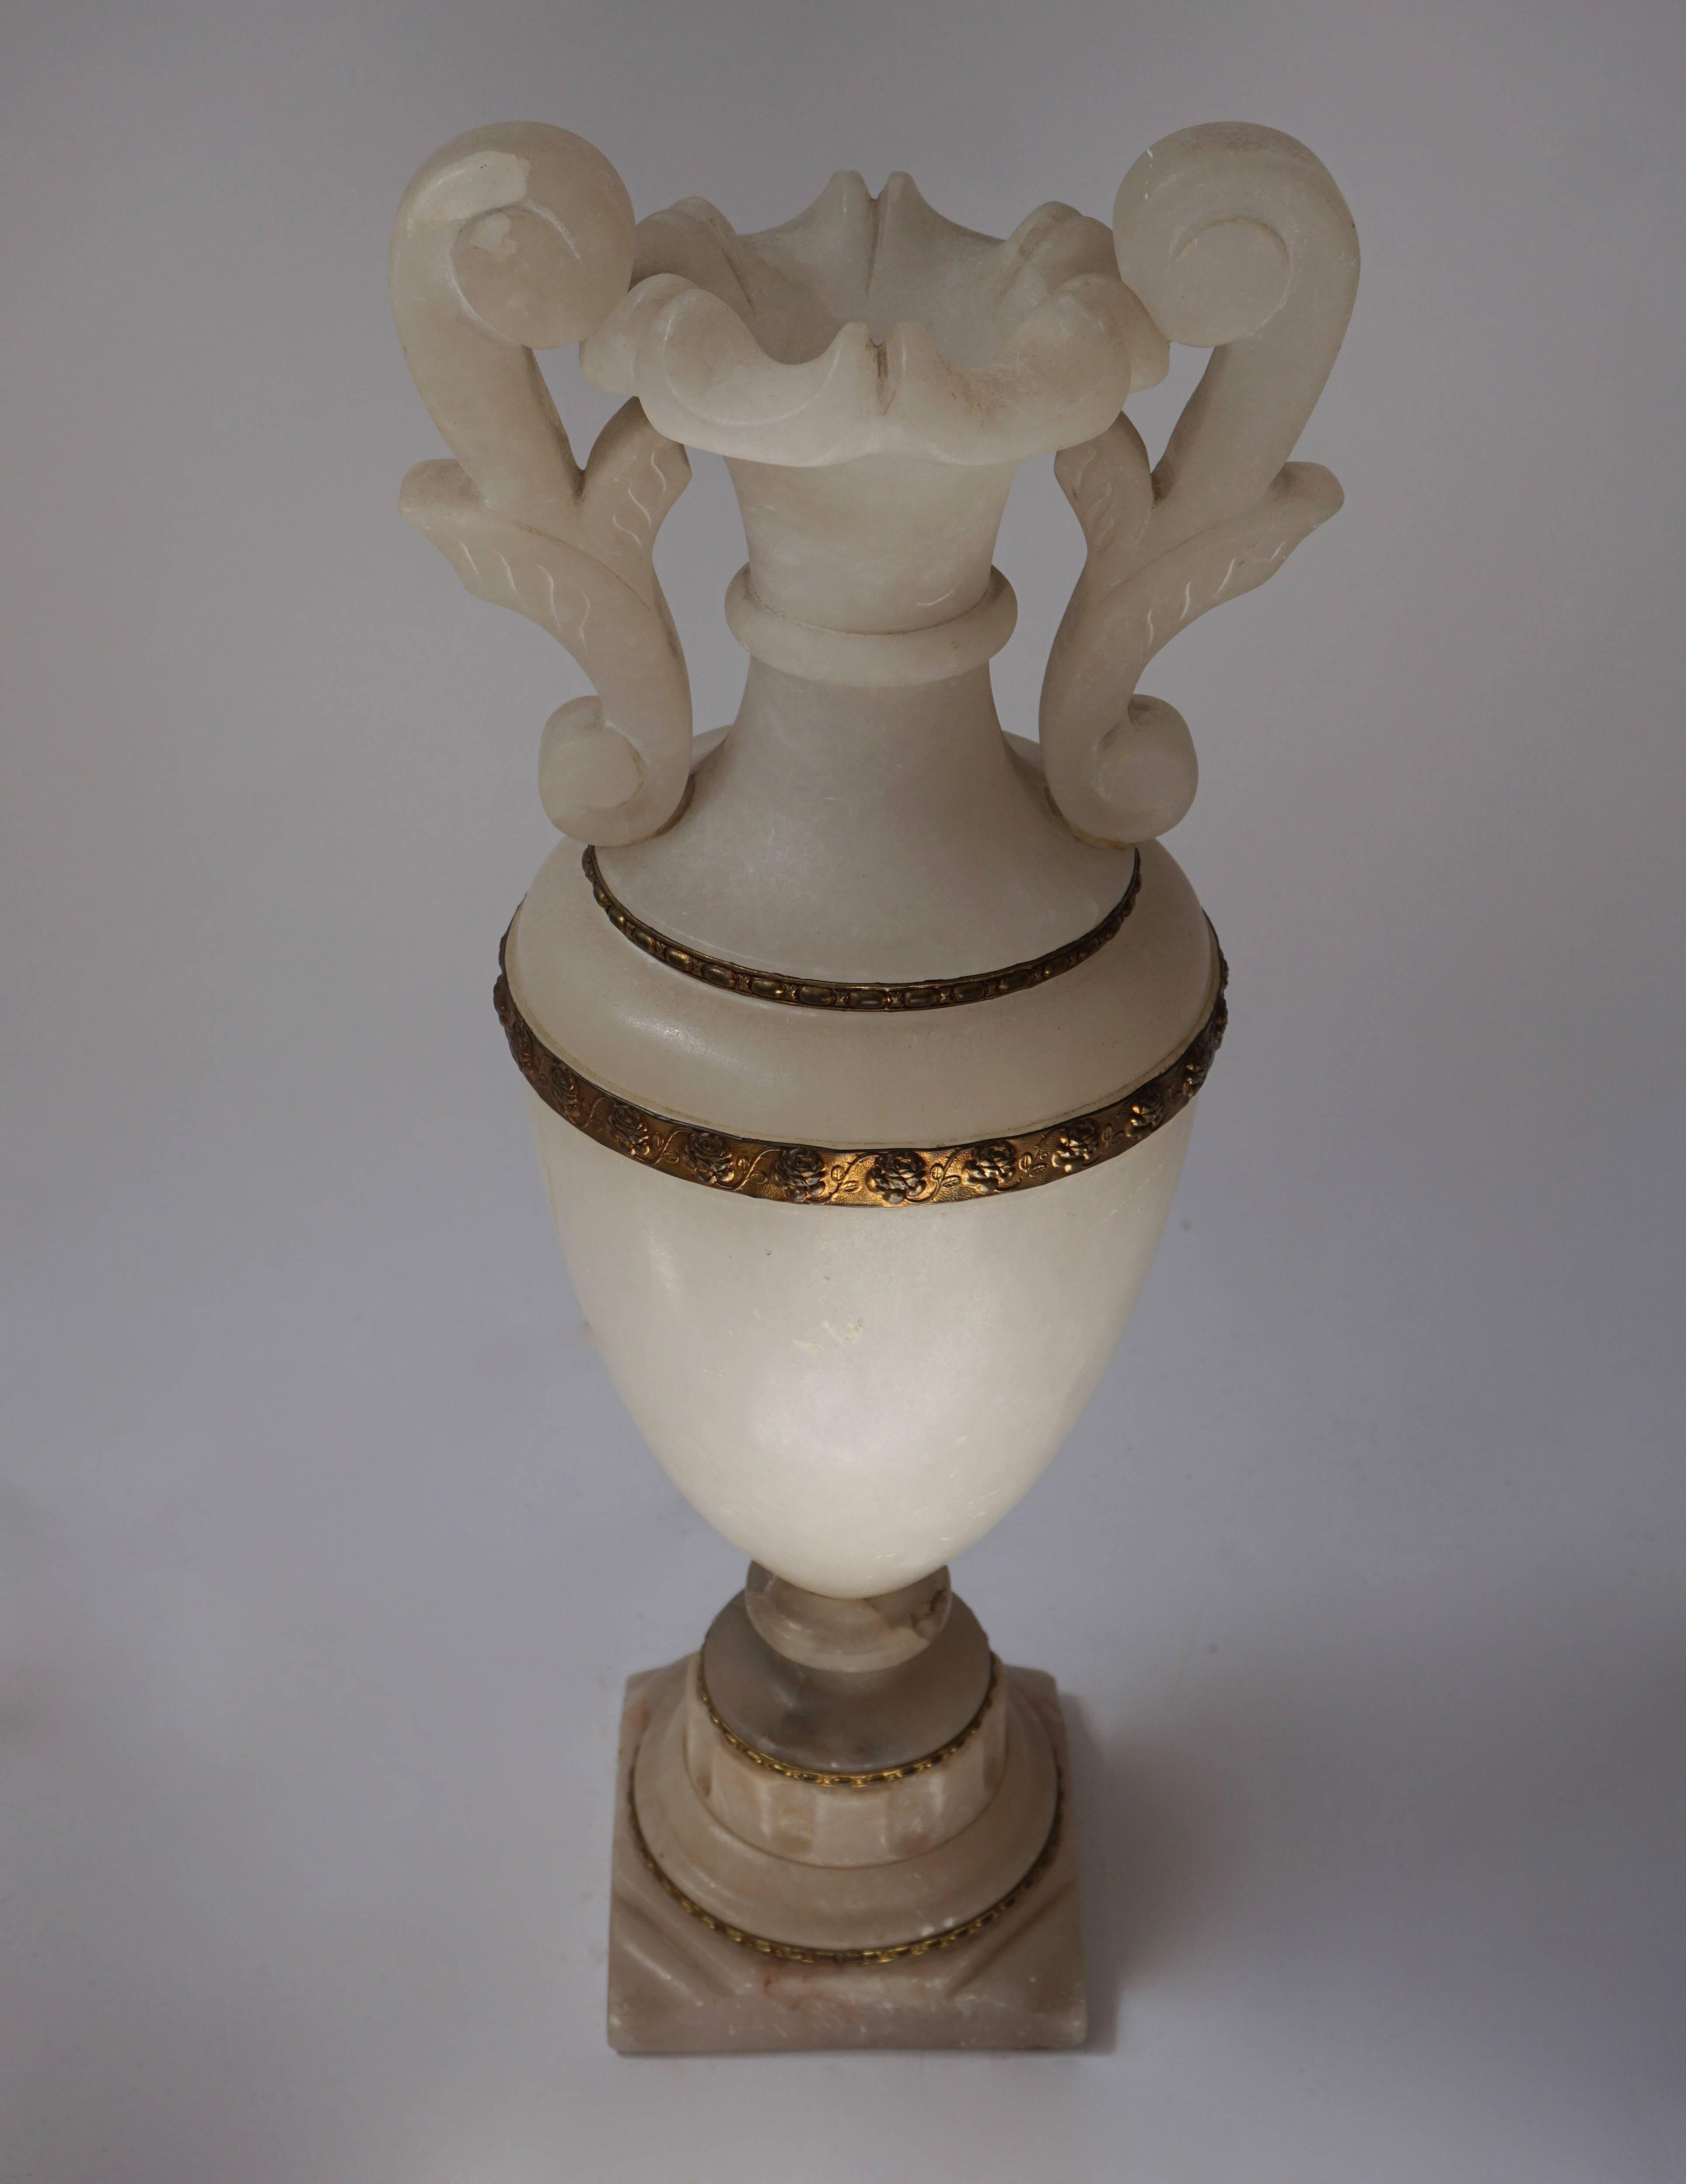 Alabaster and brass table lamp.
Measures: Height 53 cm.
Width 22 cm.
Depth 17 cm.